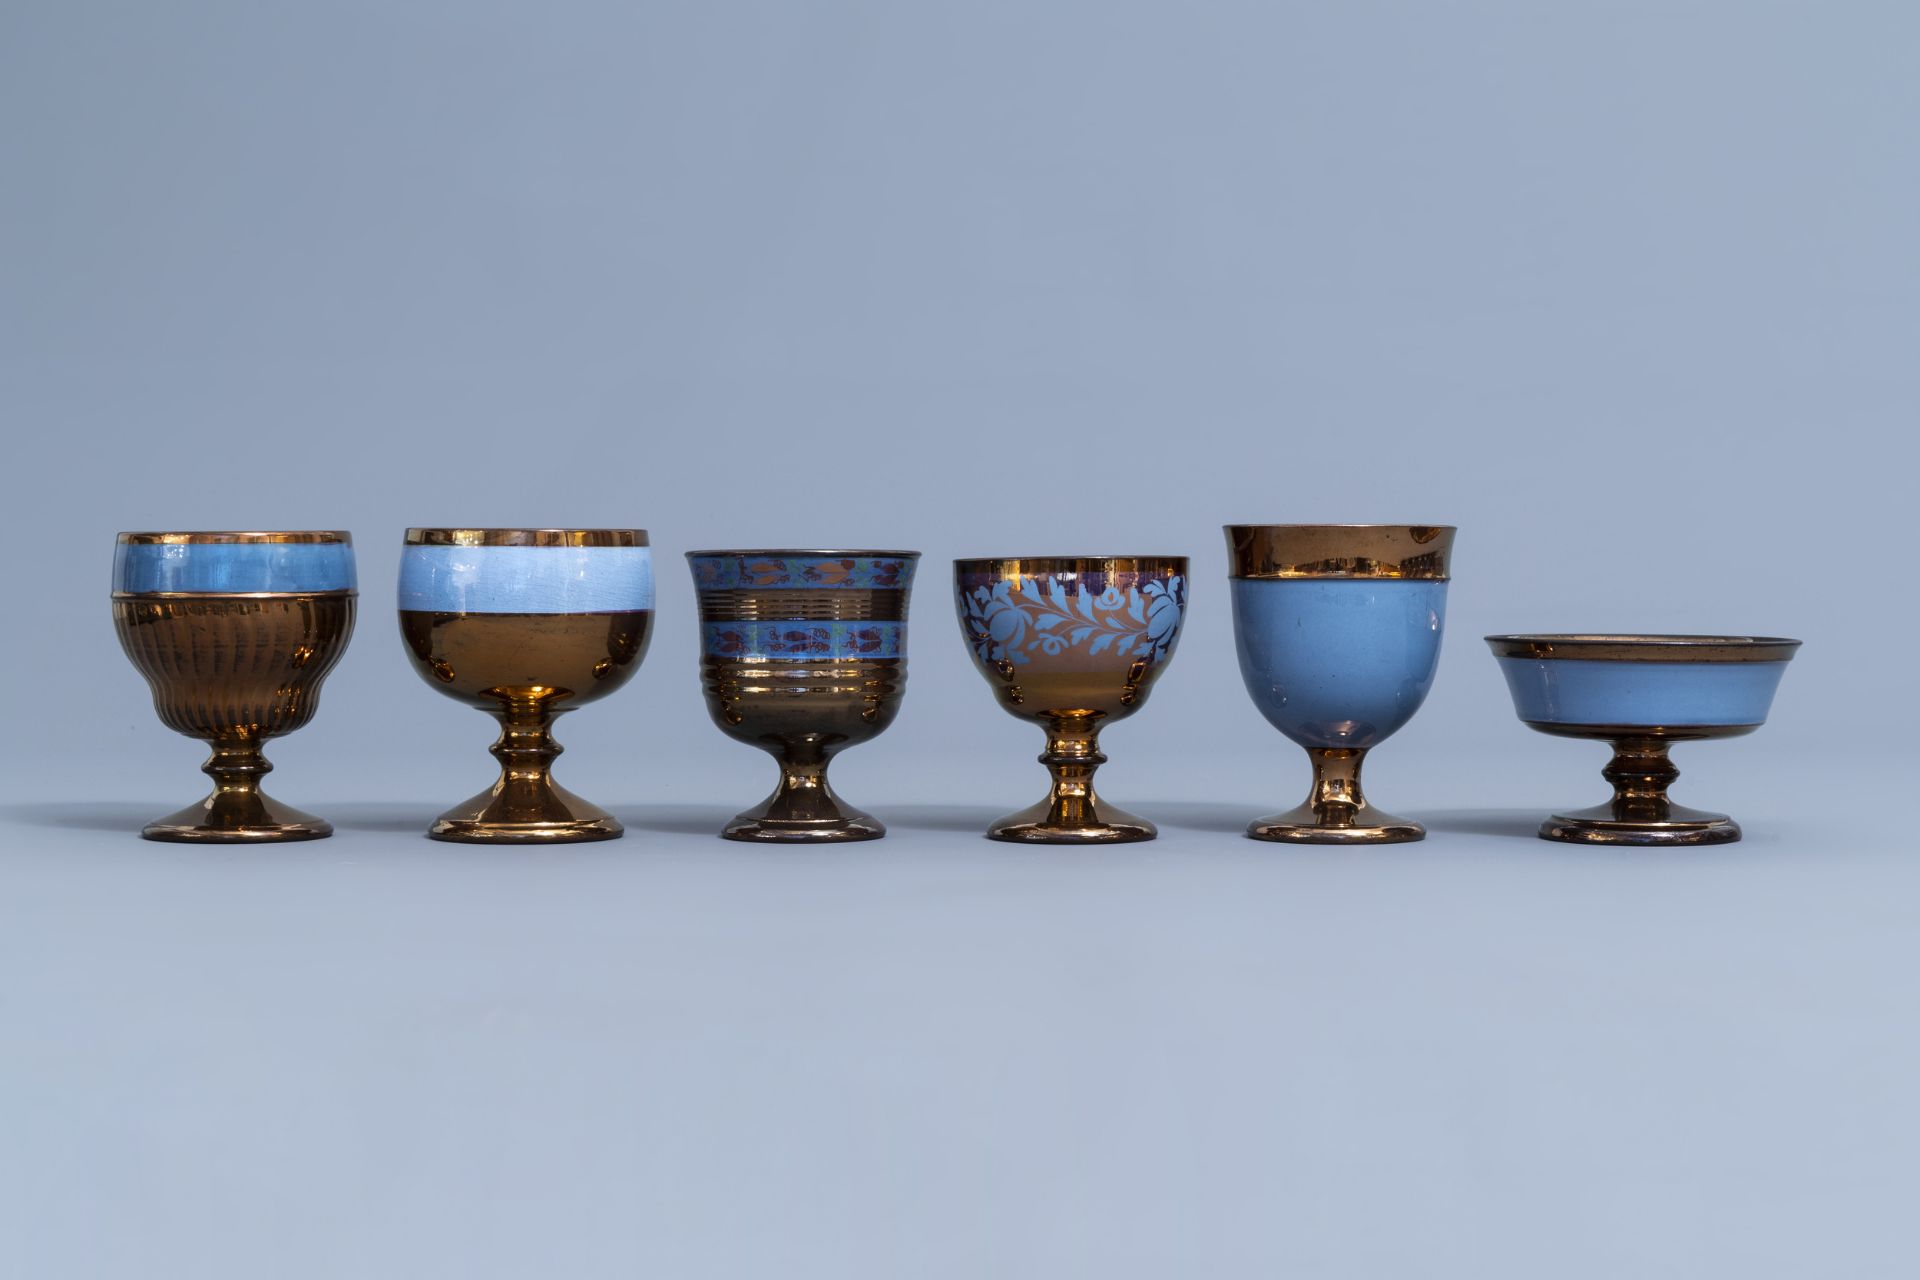 A varied collection of English lustreware items with blue design, 19th C. - Image 27 of 50